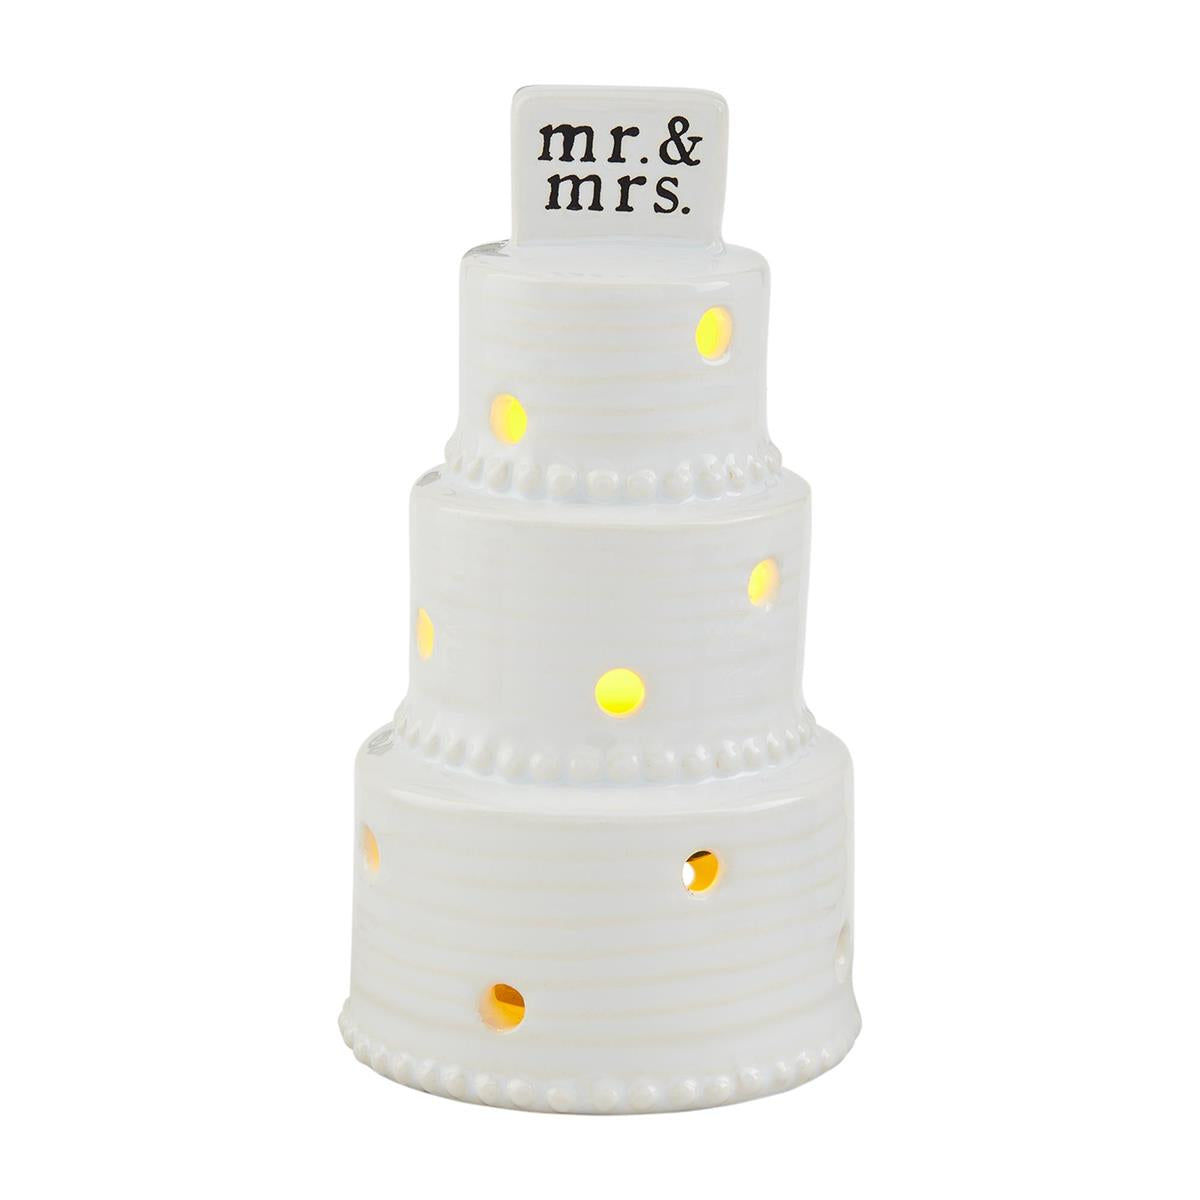 A light up wedding cake sitter that reads "Mr. and Mrs. at the top." From Mud Pie.